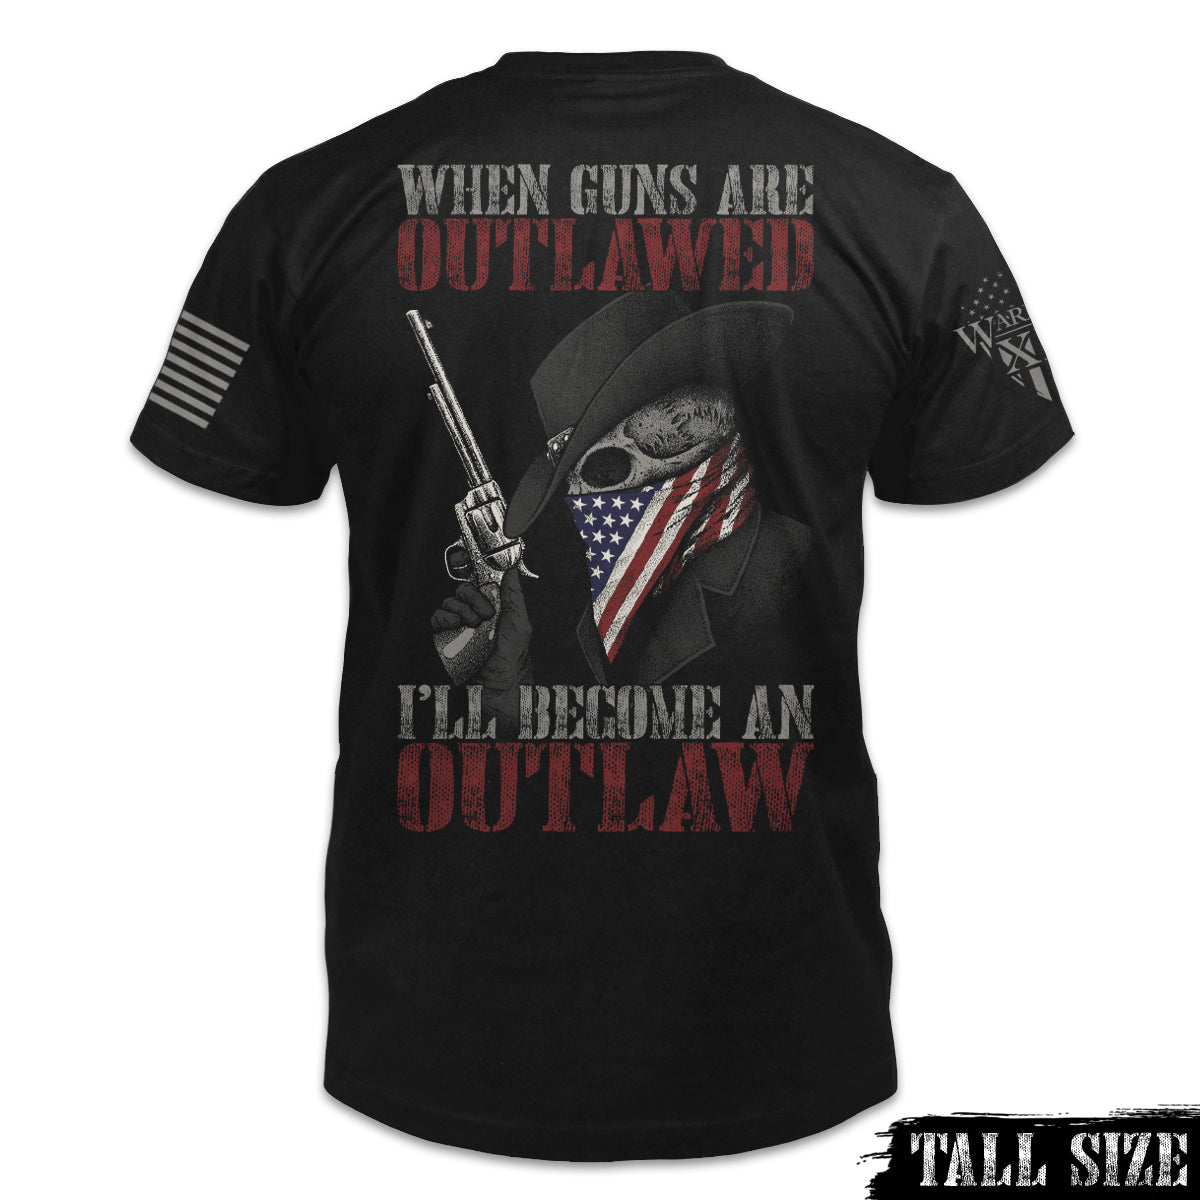 A black tall size shirt with the words "When guns are outlawed, I'll become an outlaw" with skeleton holding a gun printed on the back of the shirt.